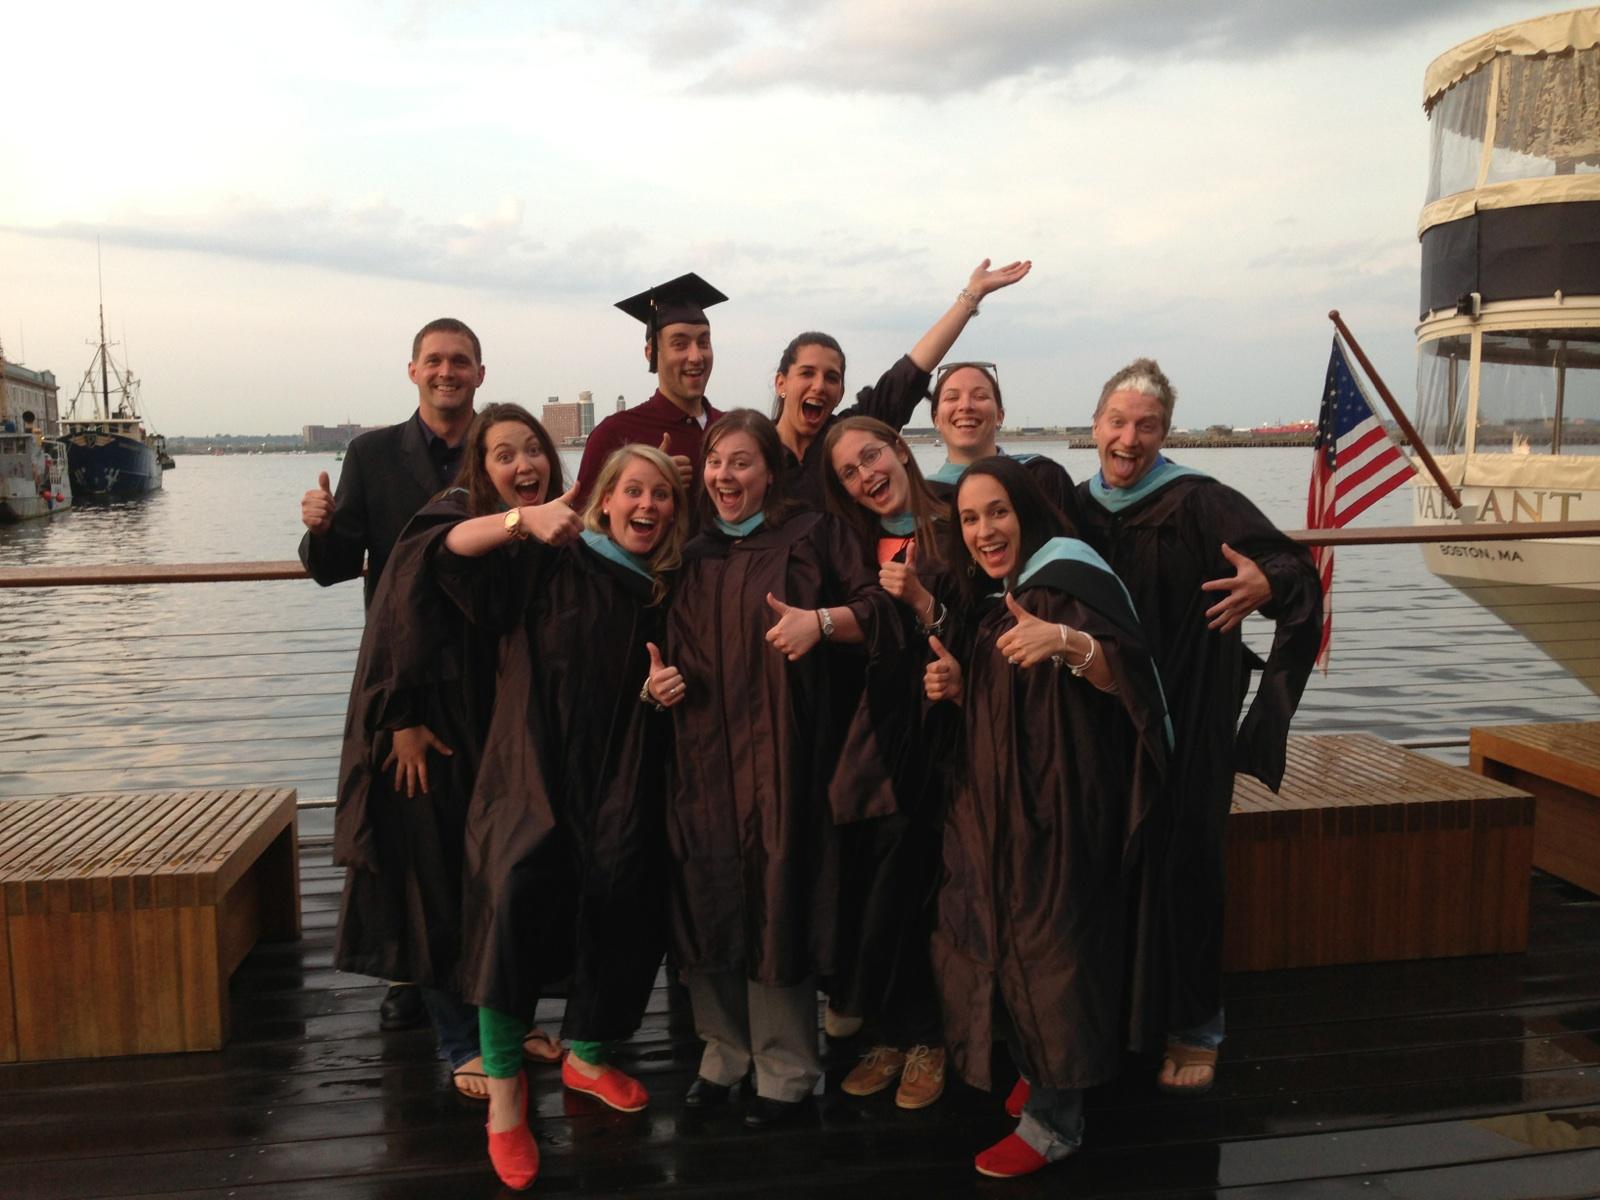 2013 graduates at Jerry Remy's, the 'fun' picture (thanks Jane!)